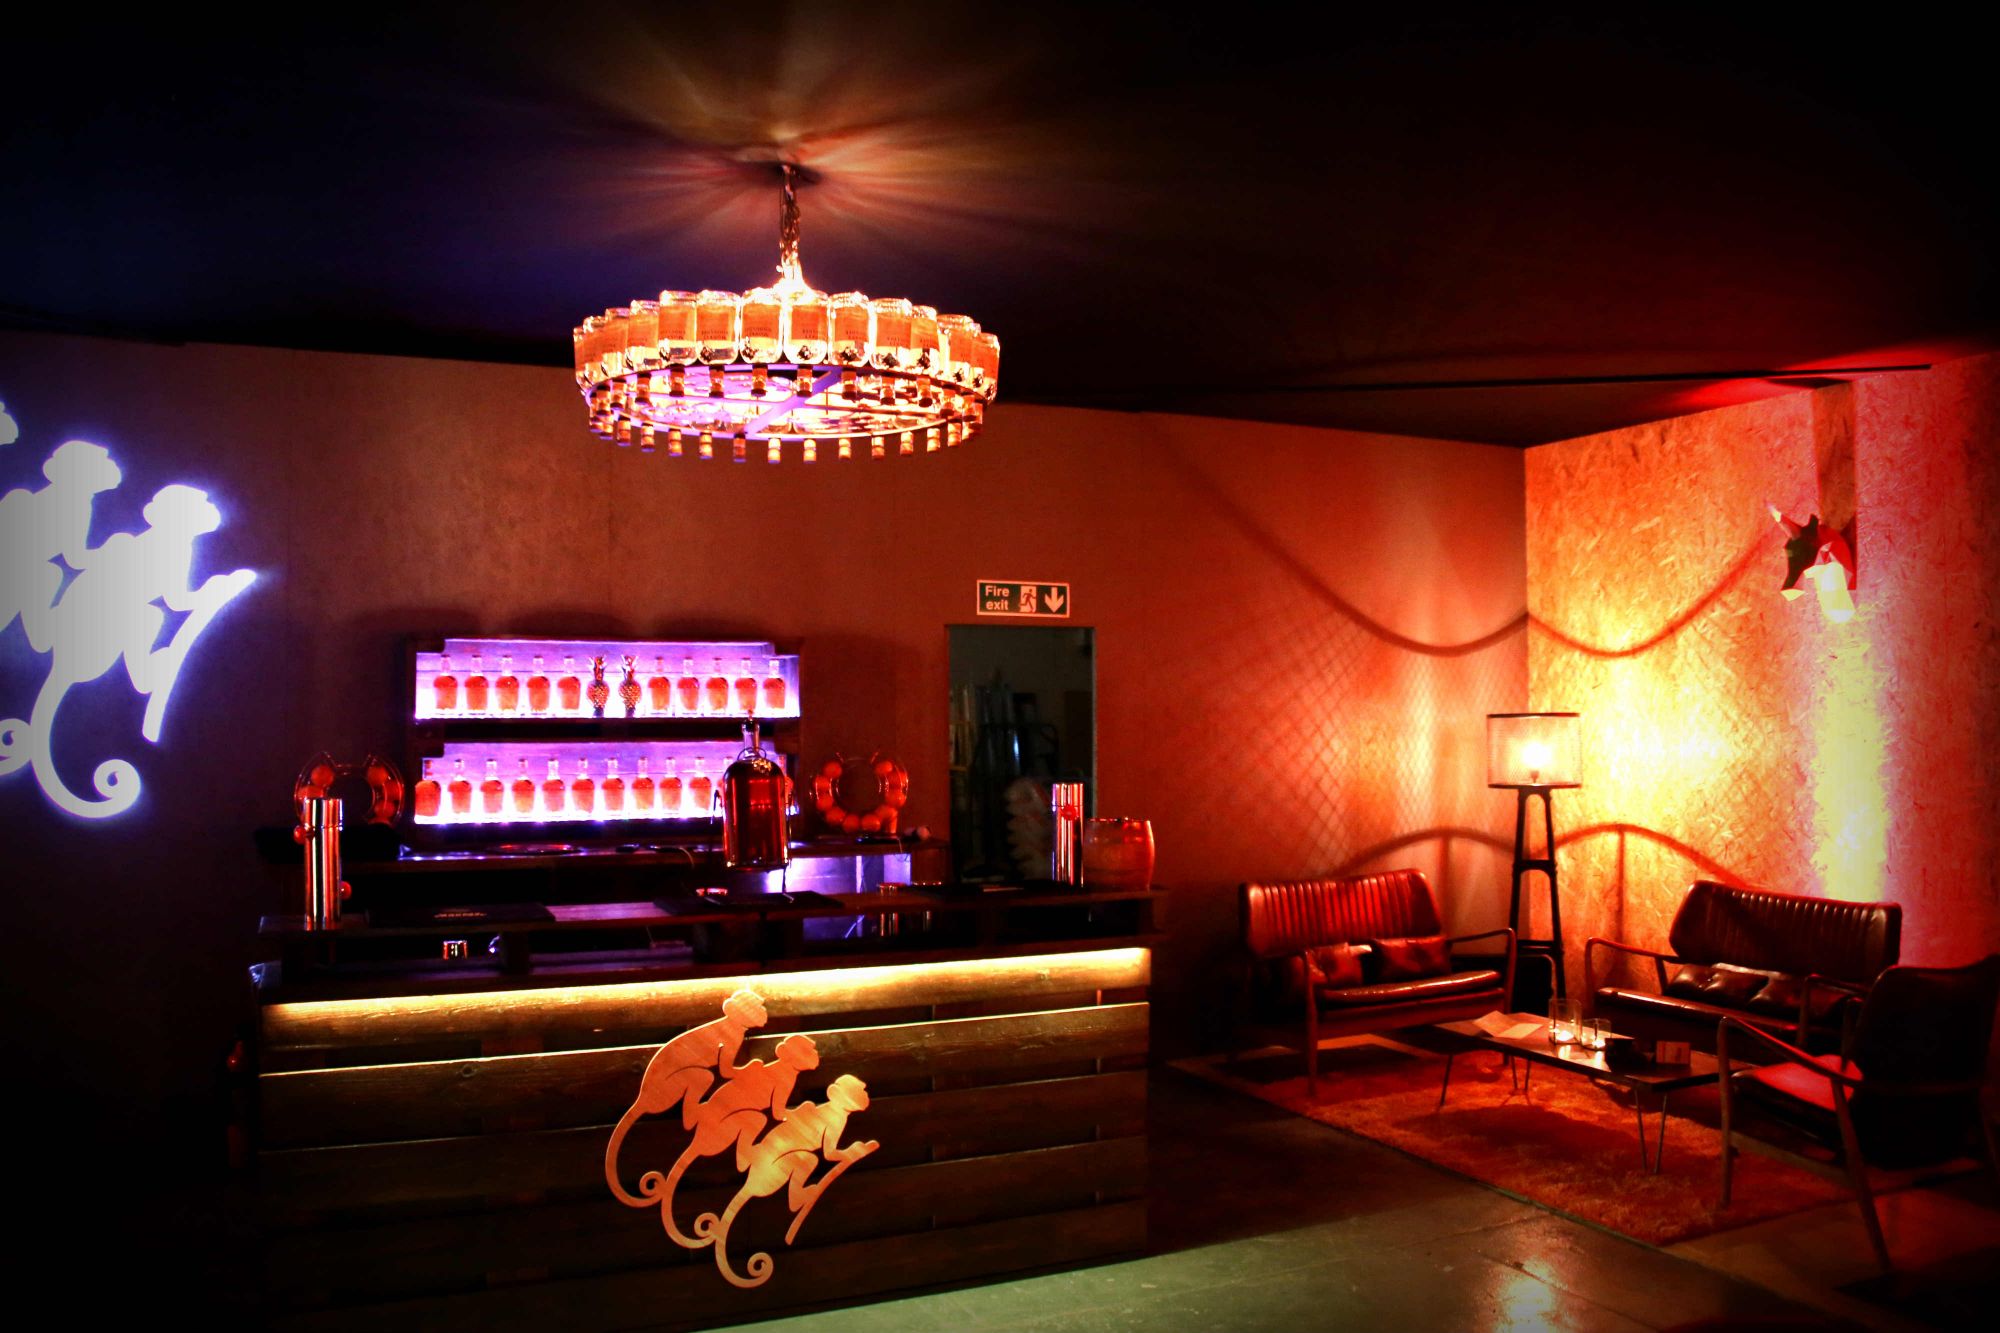 Indulgent furniture was provided by Furniture on the move as seen in this image which contains the monkey shoulder logo light up by LED next to a bar filled with monkey shoulder whisky